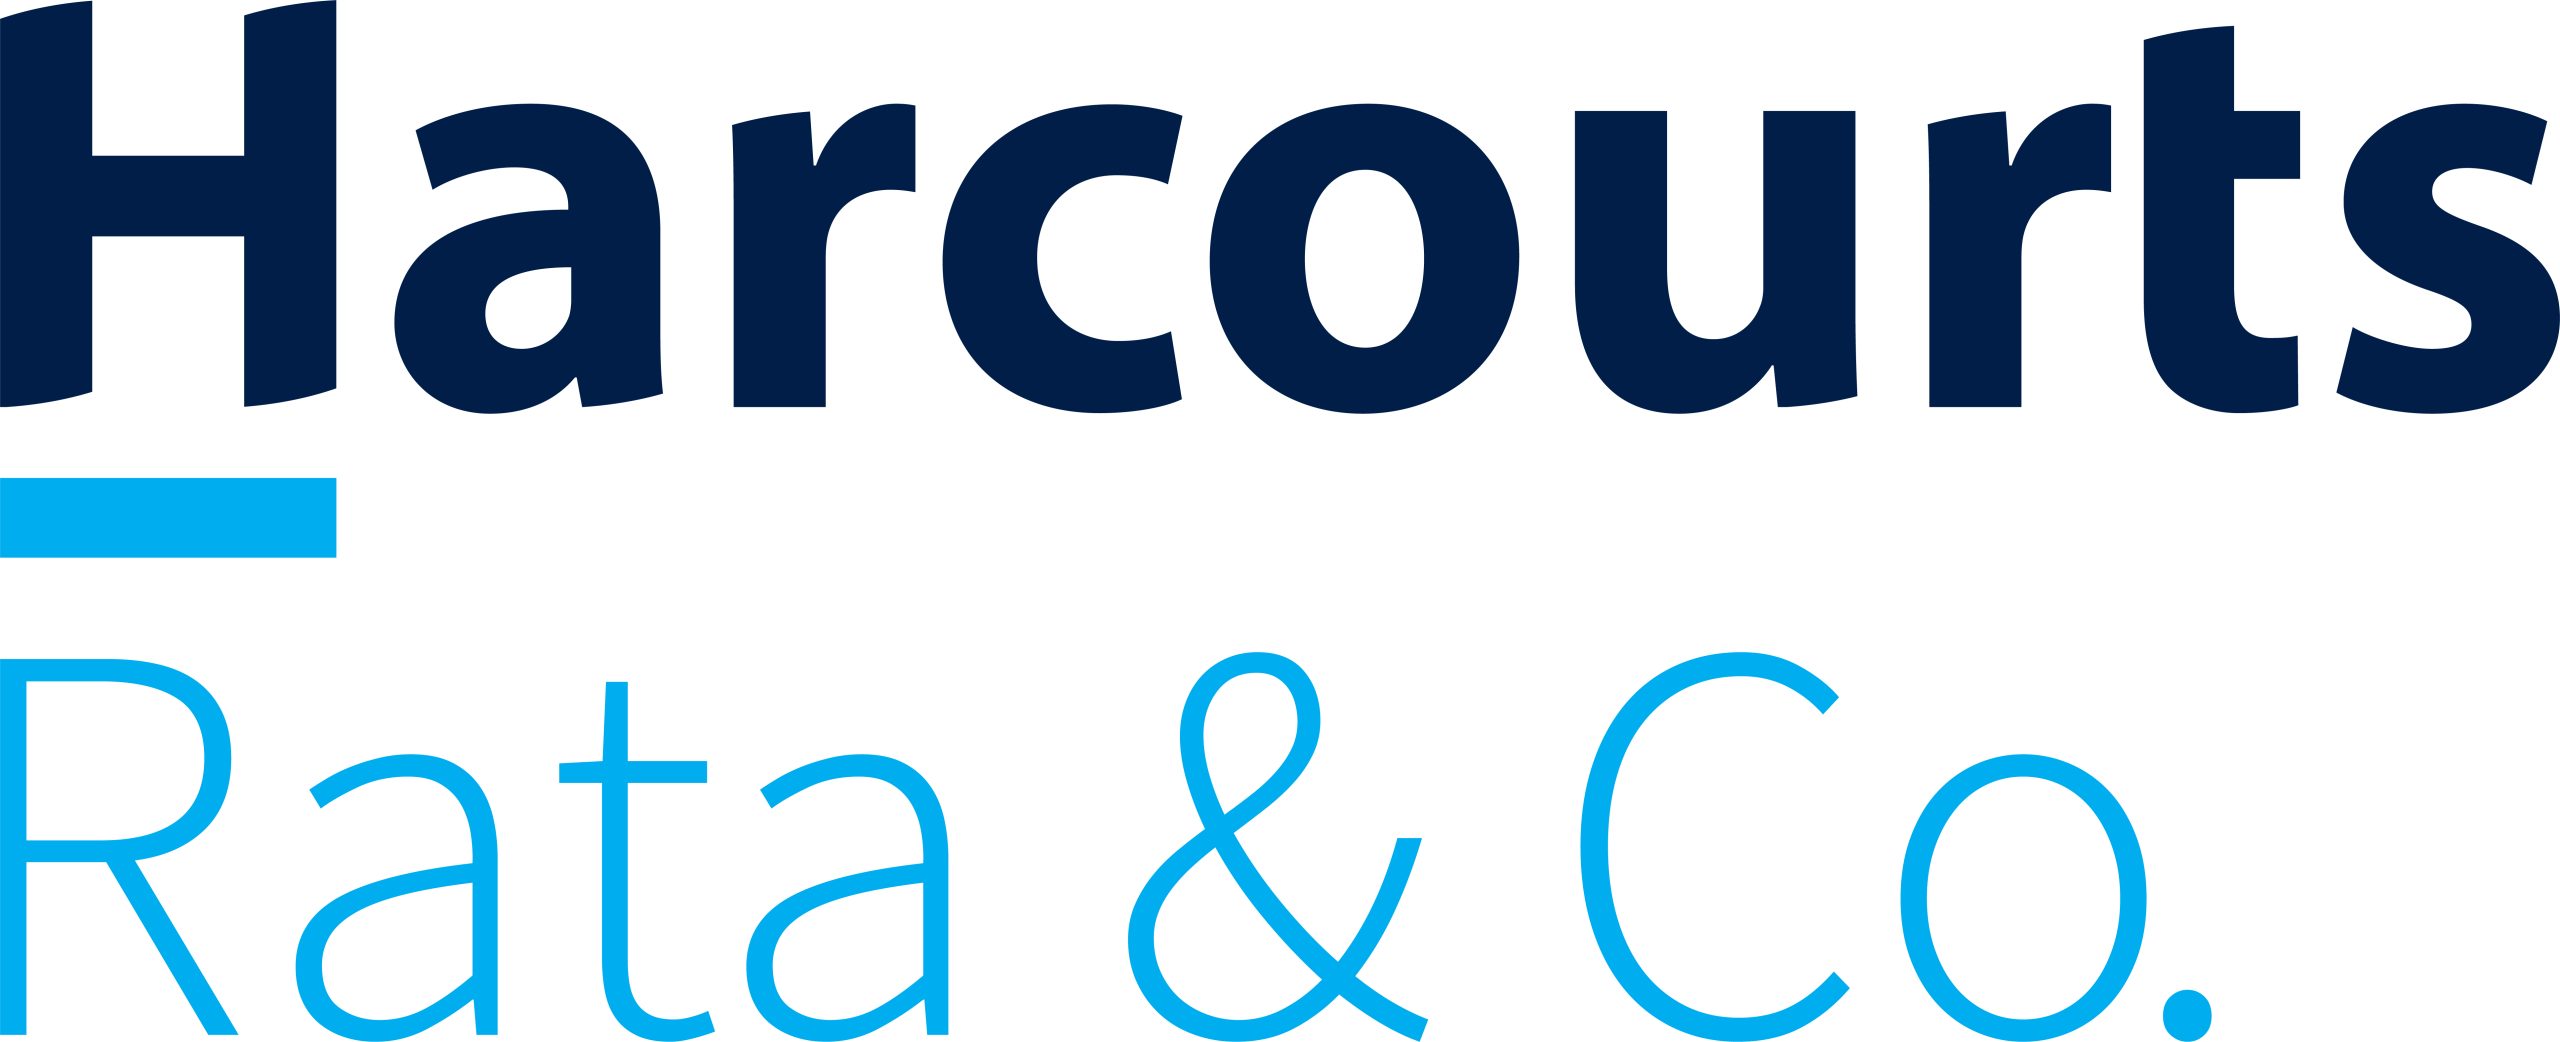 Image of text on white background. Black text on top reads "Harcourts". Blue text on bottom reads "Rata & Co.)